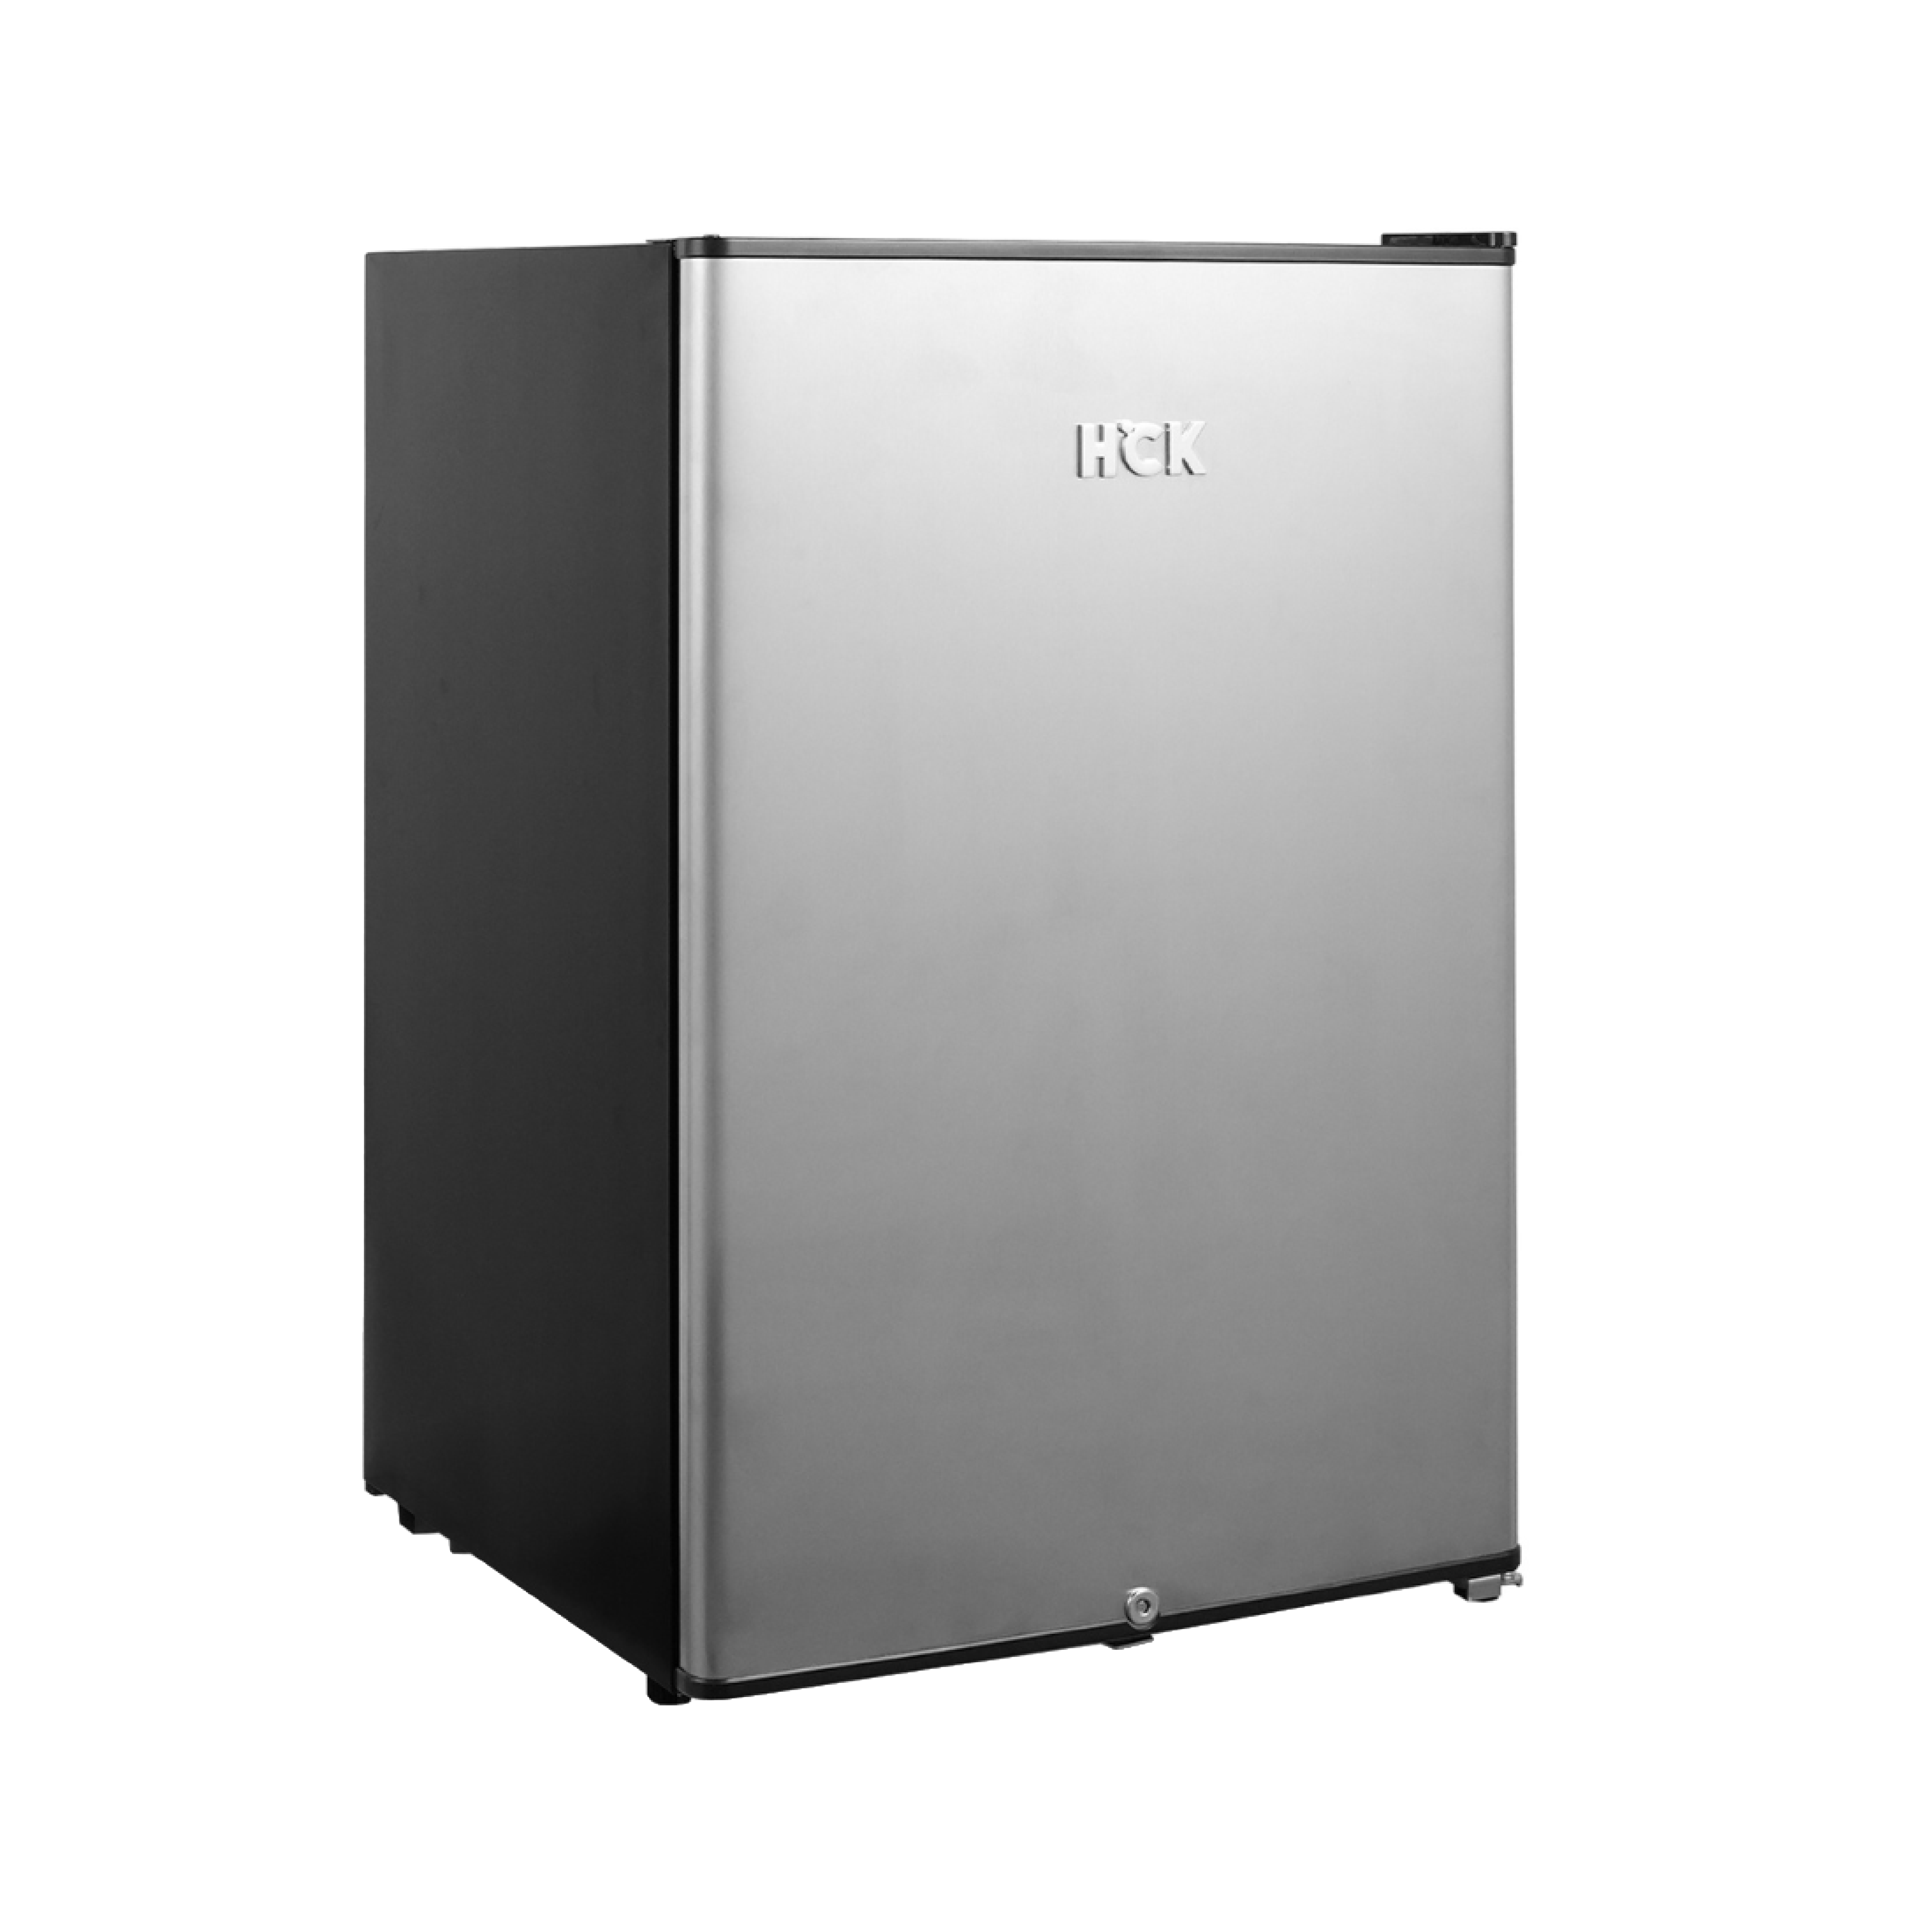 Side view of a 4.1 Cu Ft ‎Stainless Steel Outdoor Beverage Fridge 156 cans